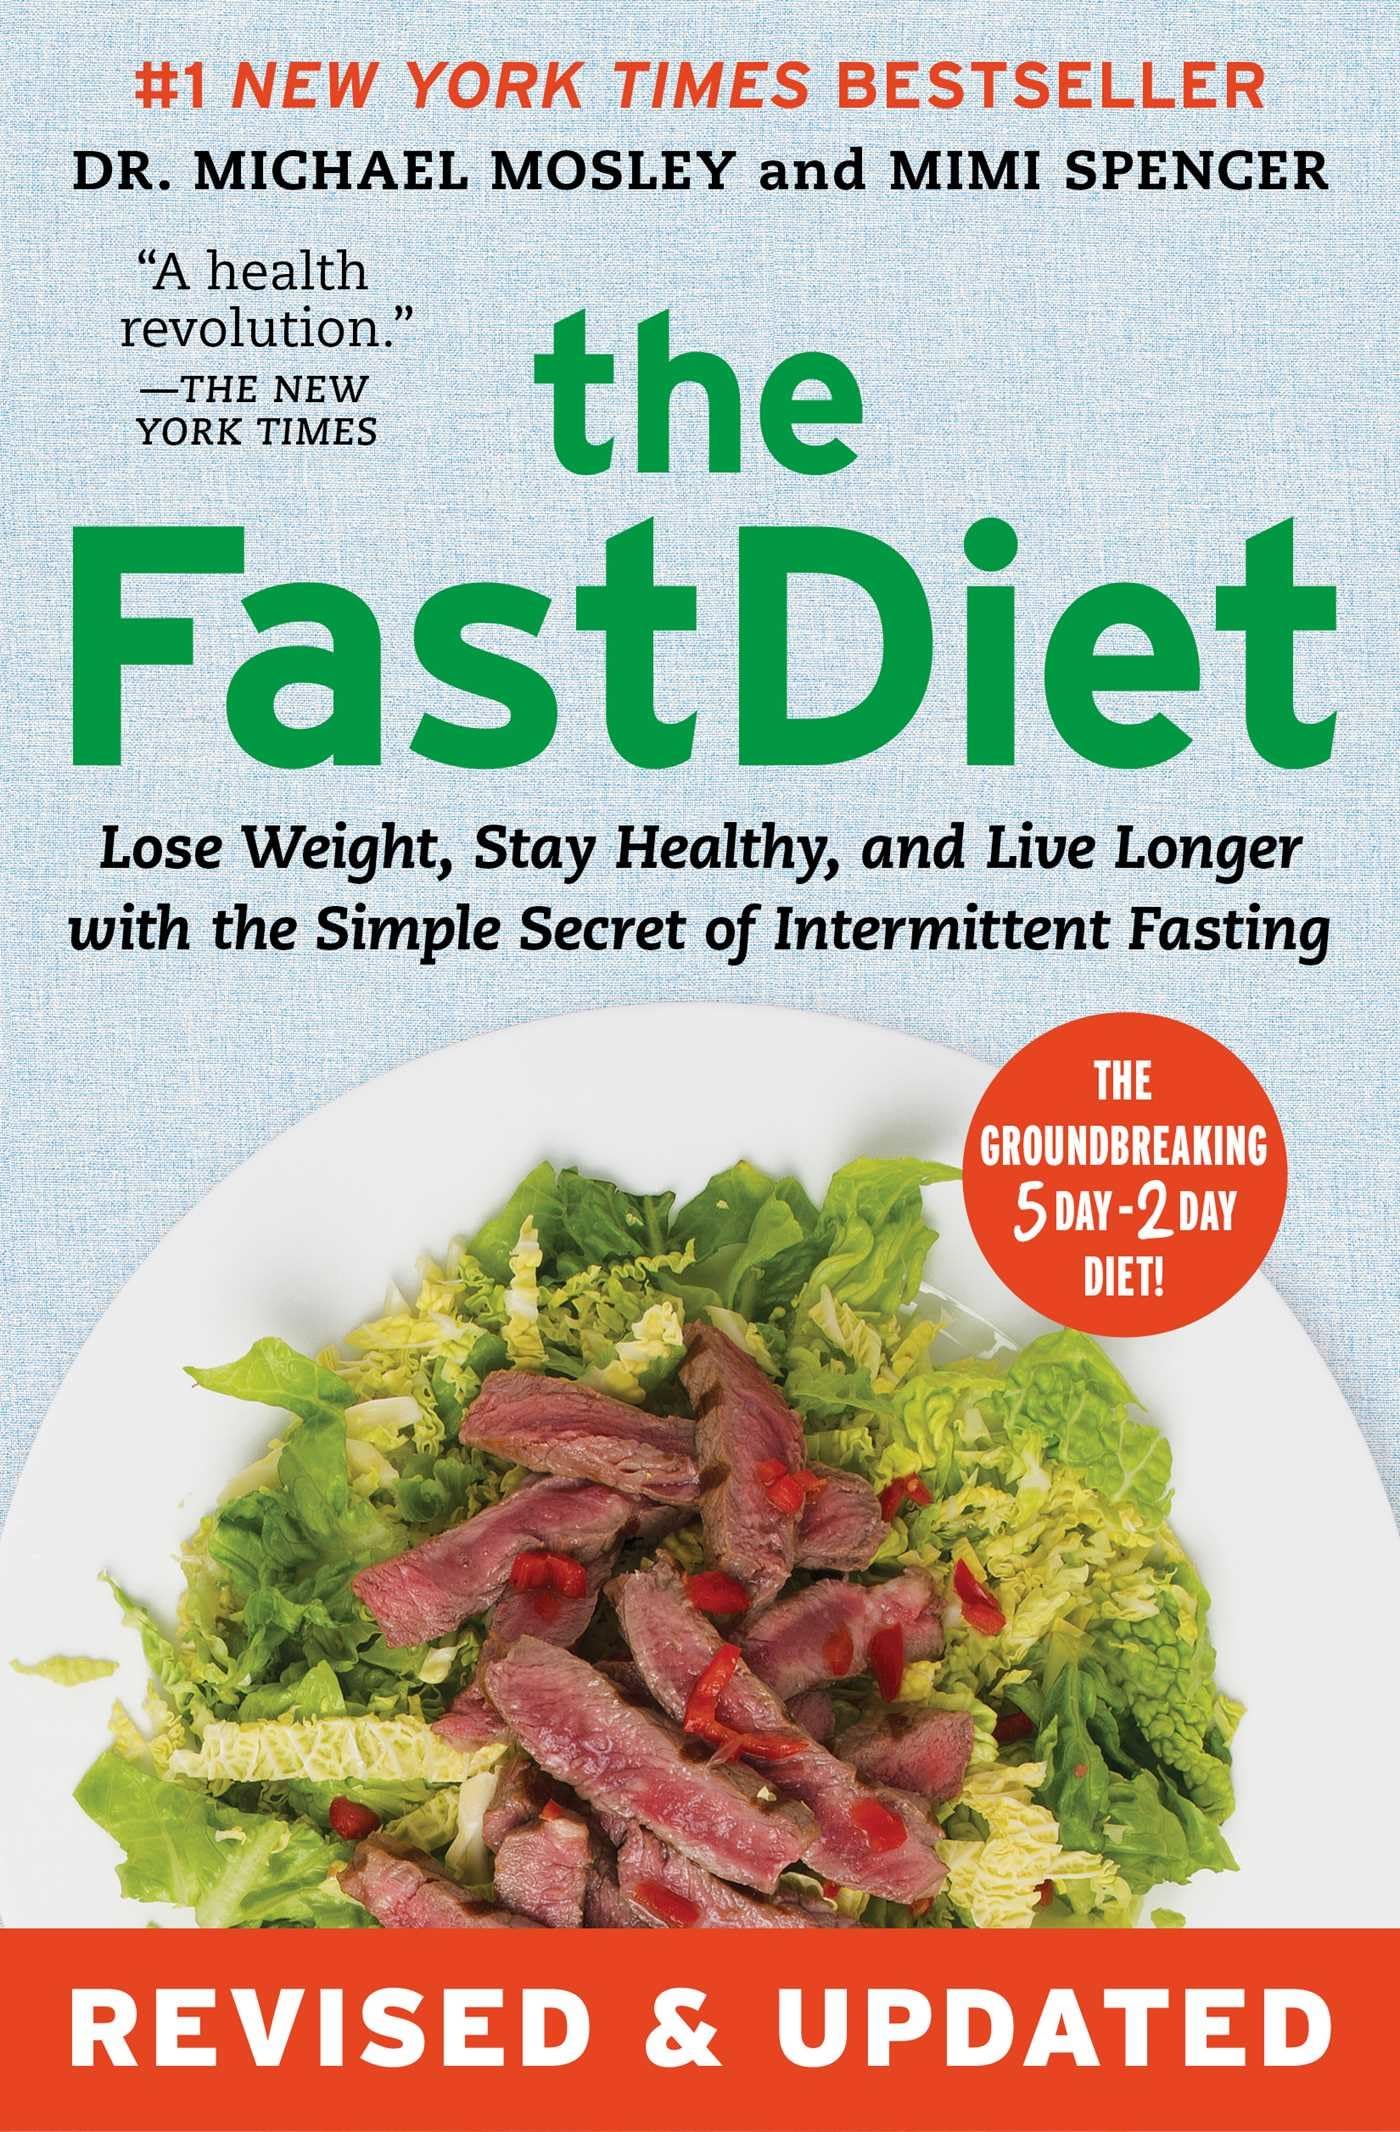 The Fastdiet - Revised & Updated: Lose Weight, Stay Healthy, and Live Longer with the Simple Secret of Intermittent Fasting by Mosley, Michael